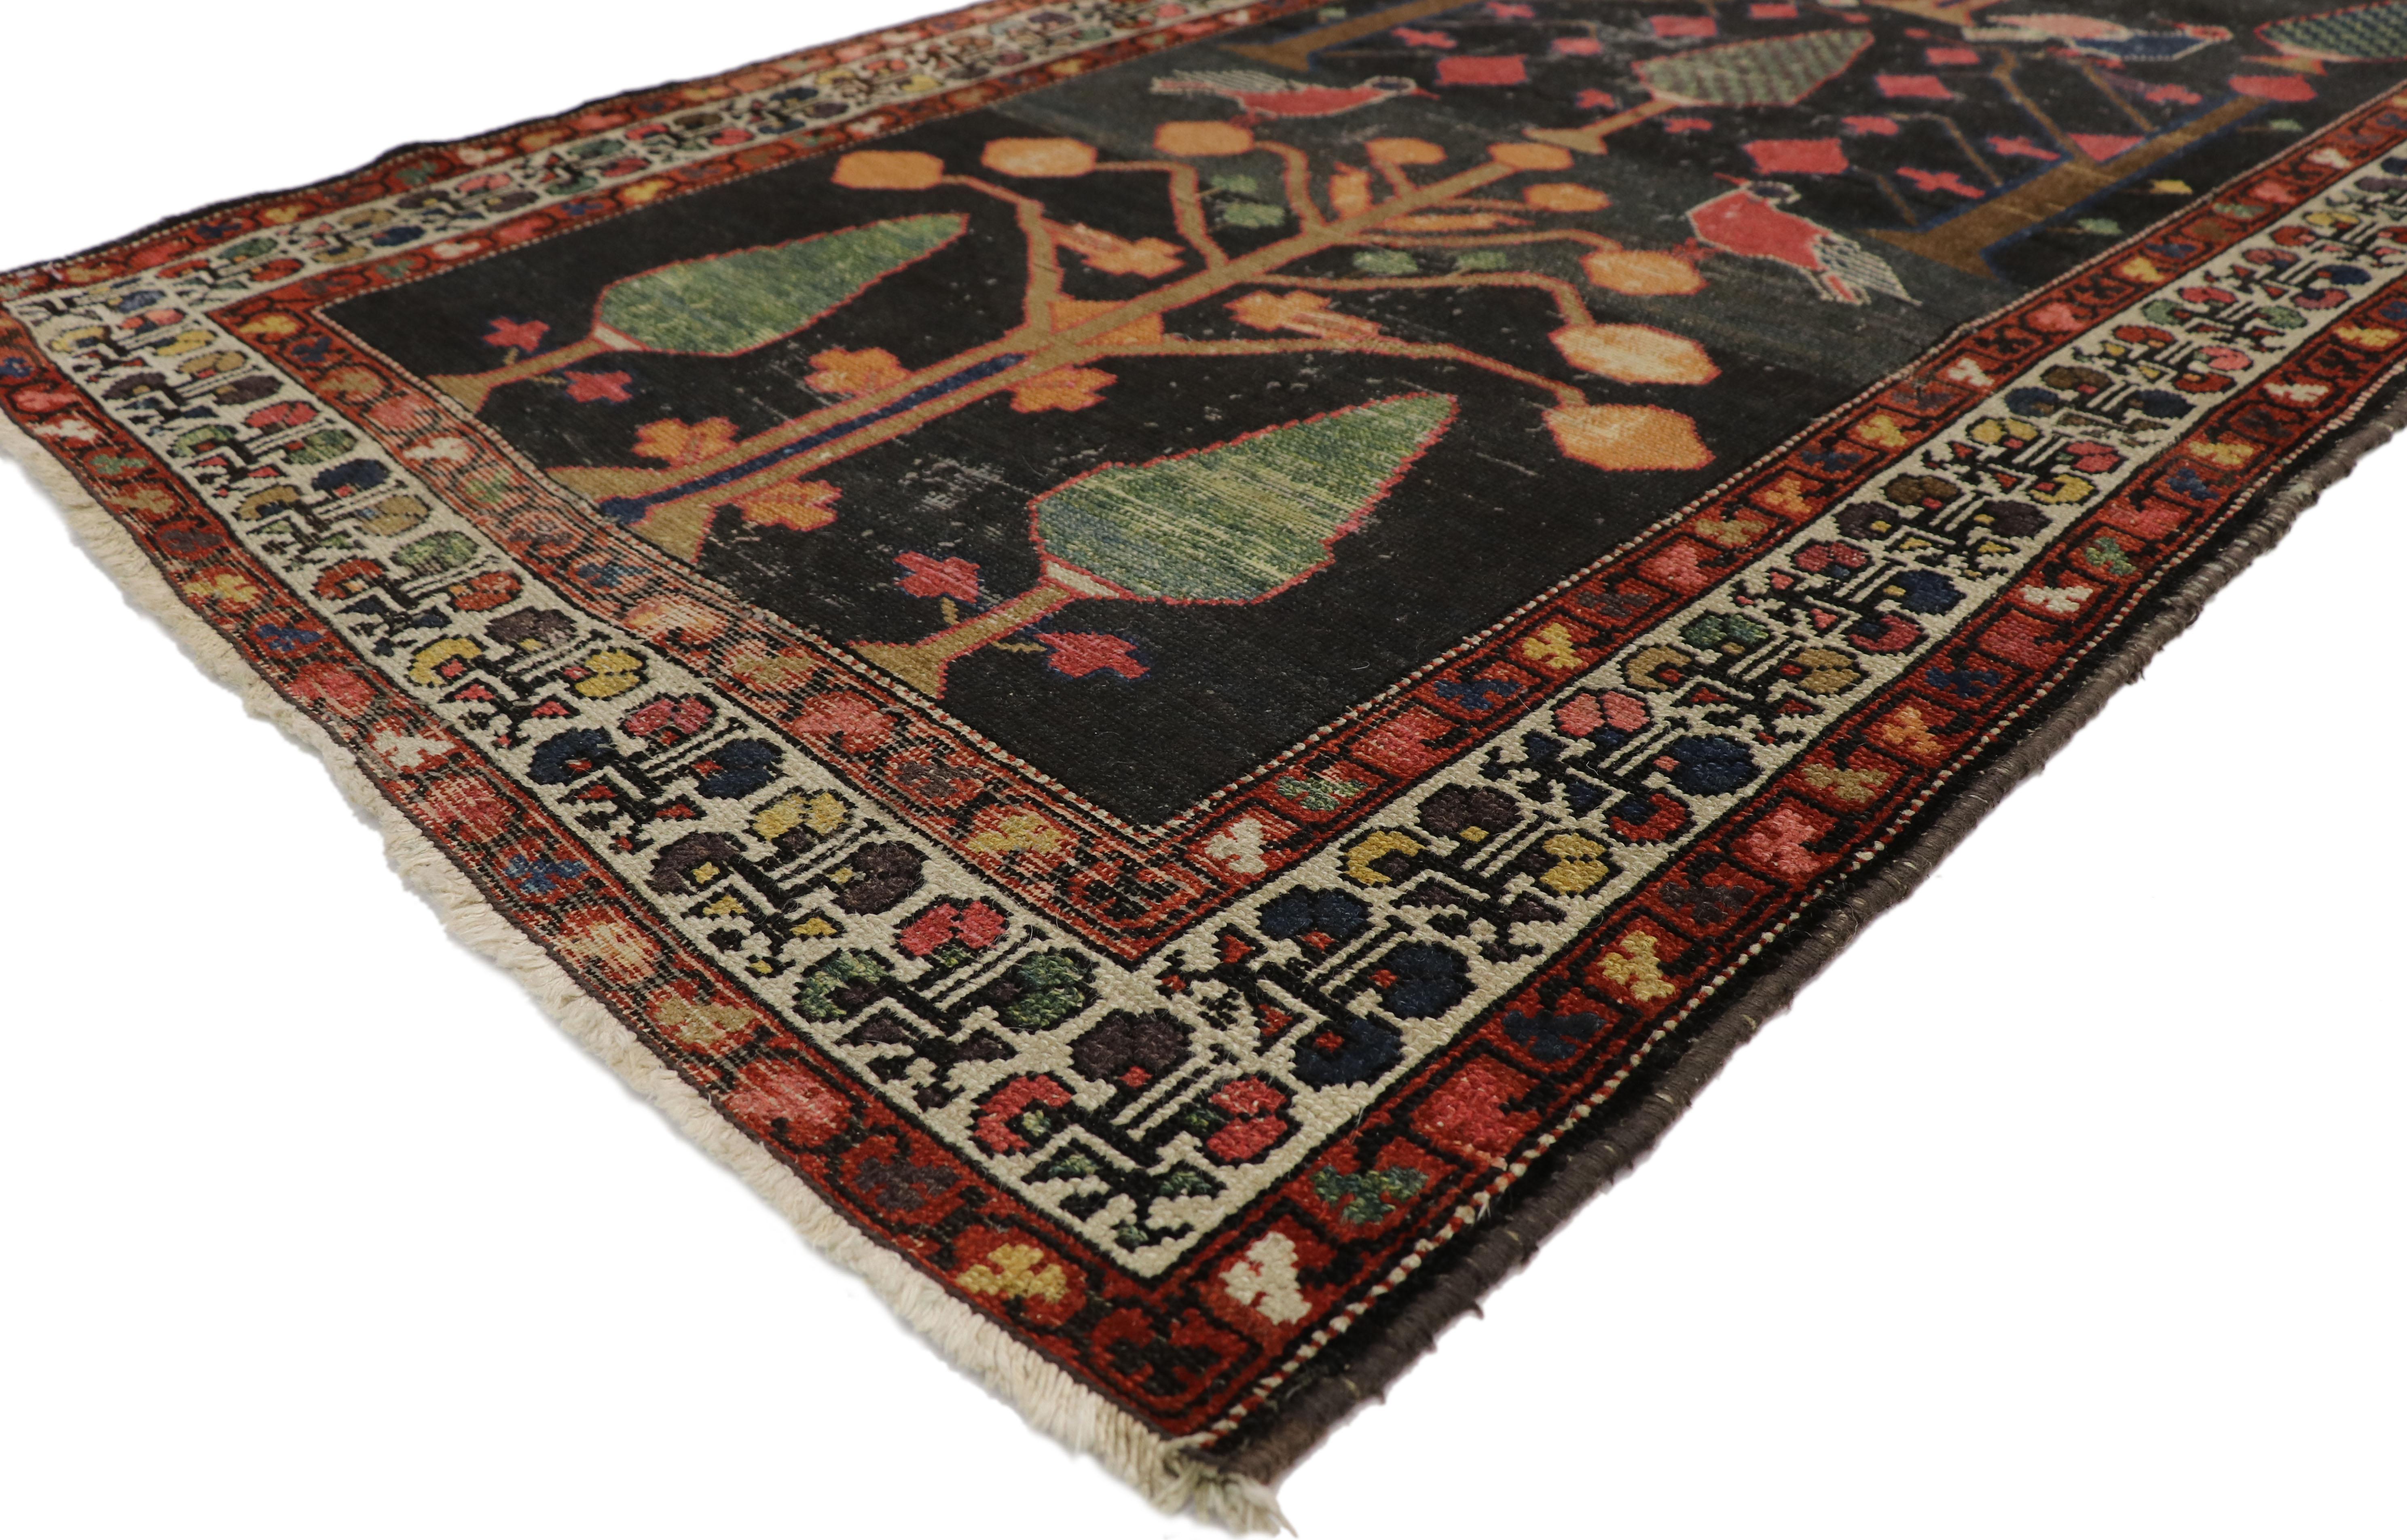 77349, distressed antique Persian Bakhtiari runner with directional Tree of Life design. This hand knotted wool distressed antique Persian Bakhtiari rug runner features a tree of life design spread across an abrashed and weathered field. The tree of